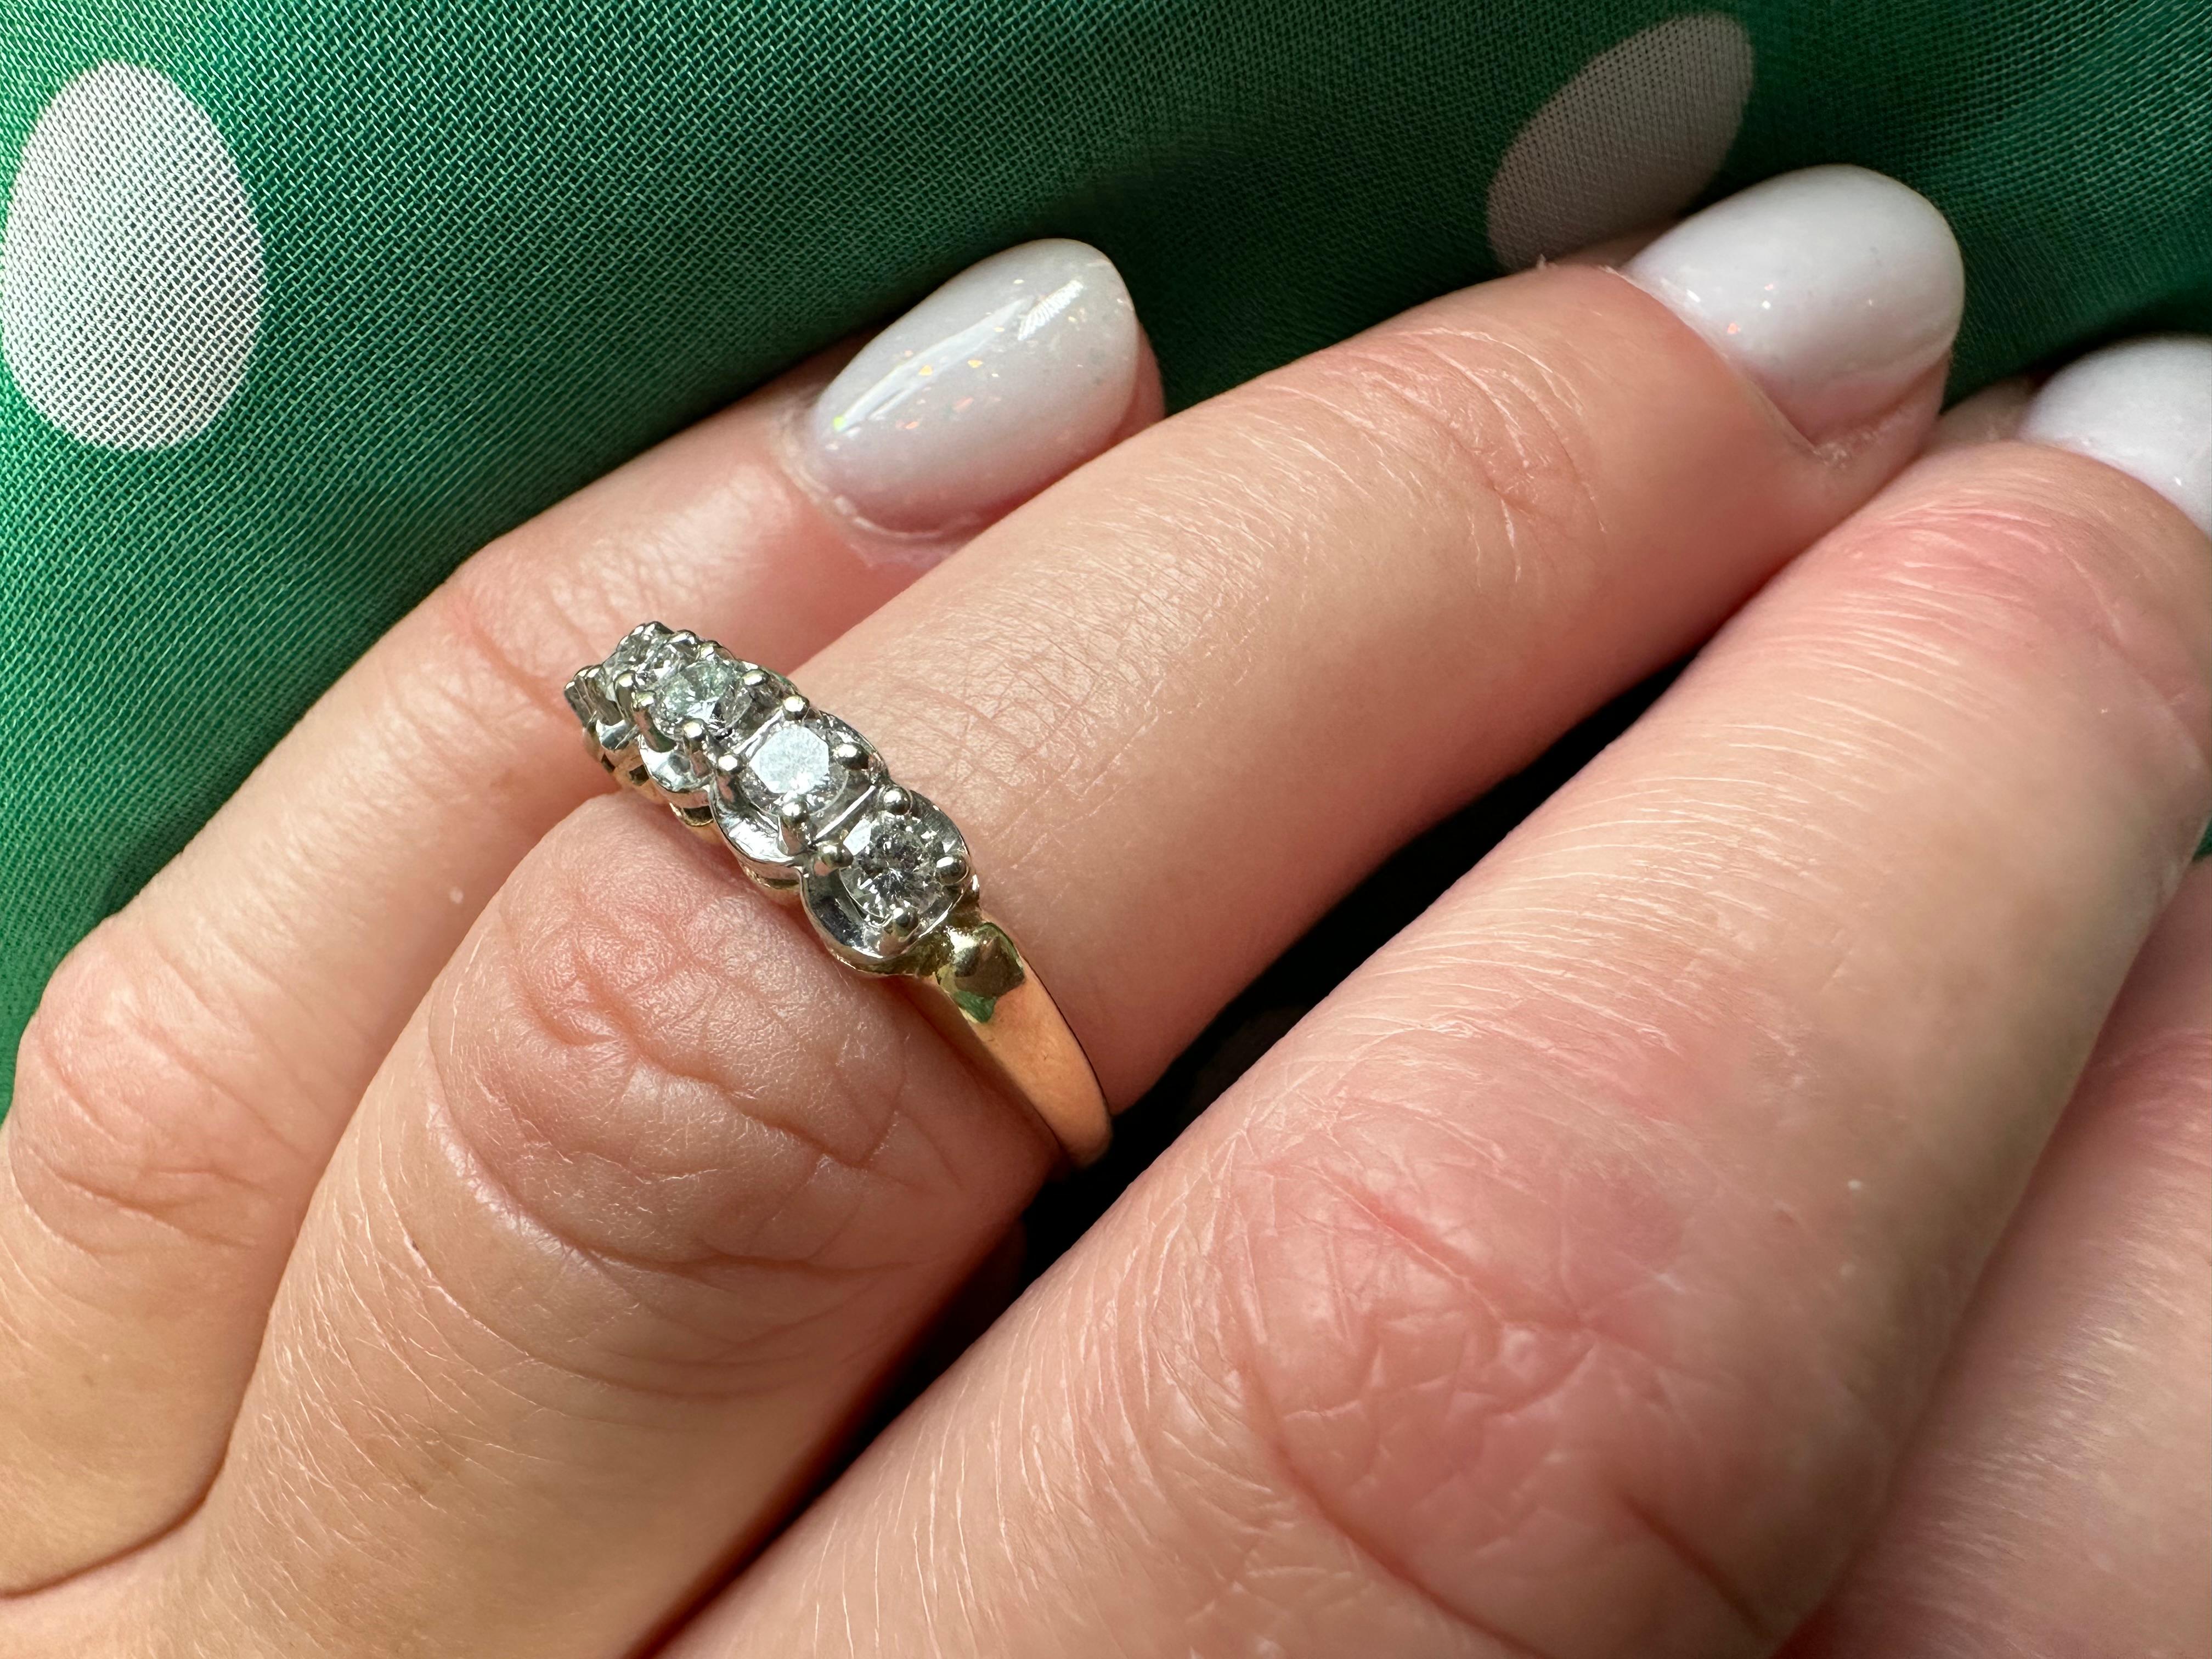 Classical Diamond Ring in 14kt White Gold 0.30ct 5 Stone Diamond Ring In Good Condition For Sale In Jupiter, FL